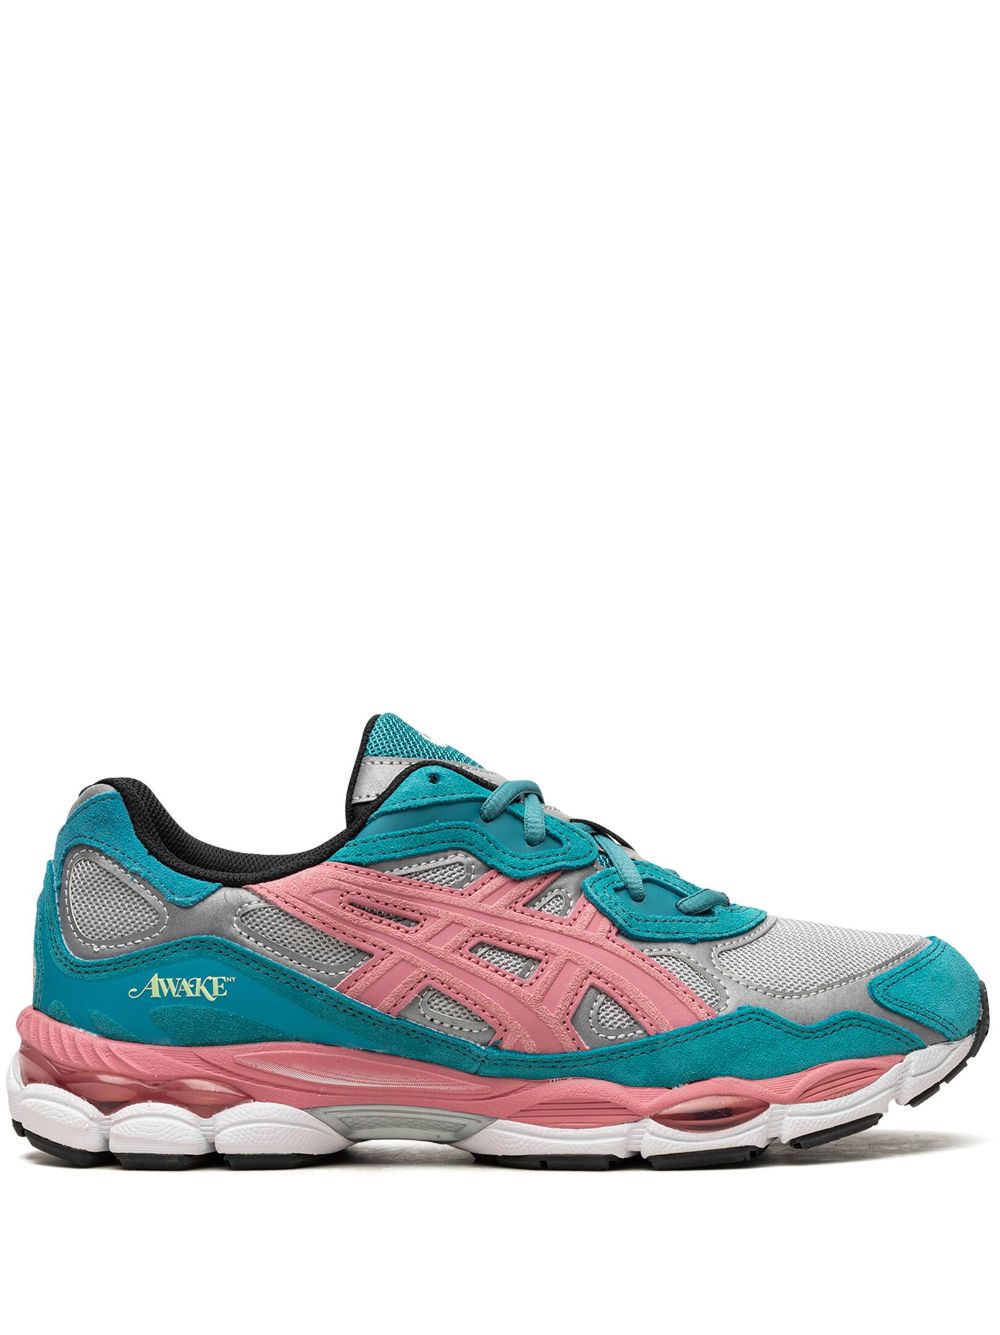 Asics X Awake Ny Gel-nyc "teal" Trainers In Blue